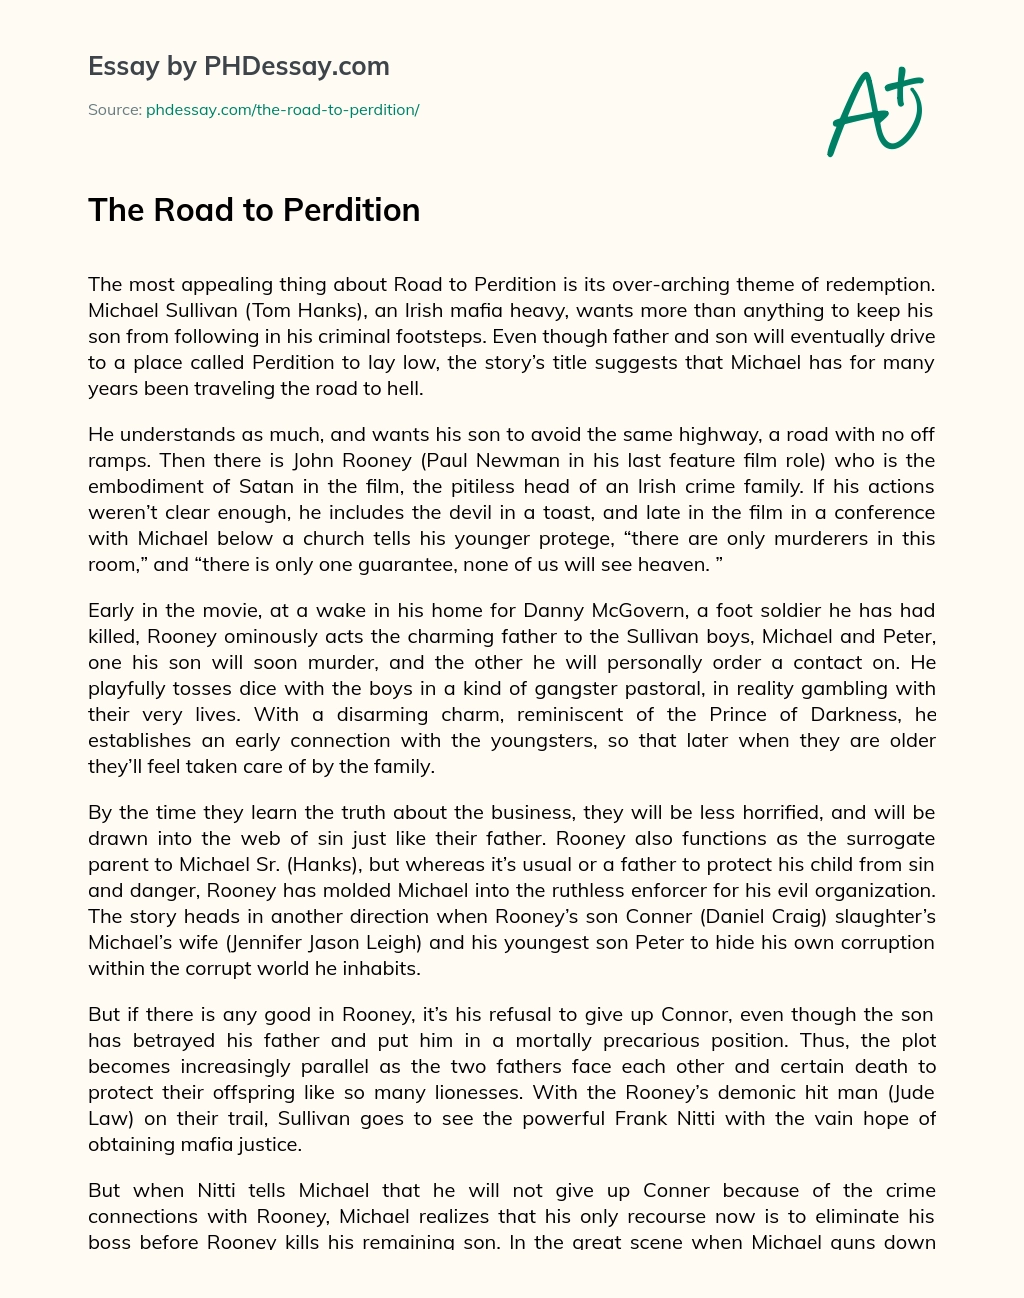 The Road to Perdition essay